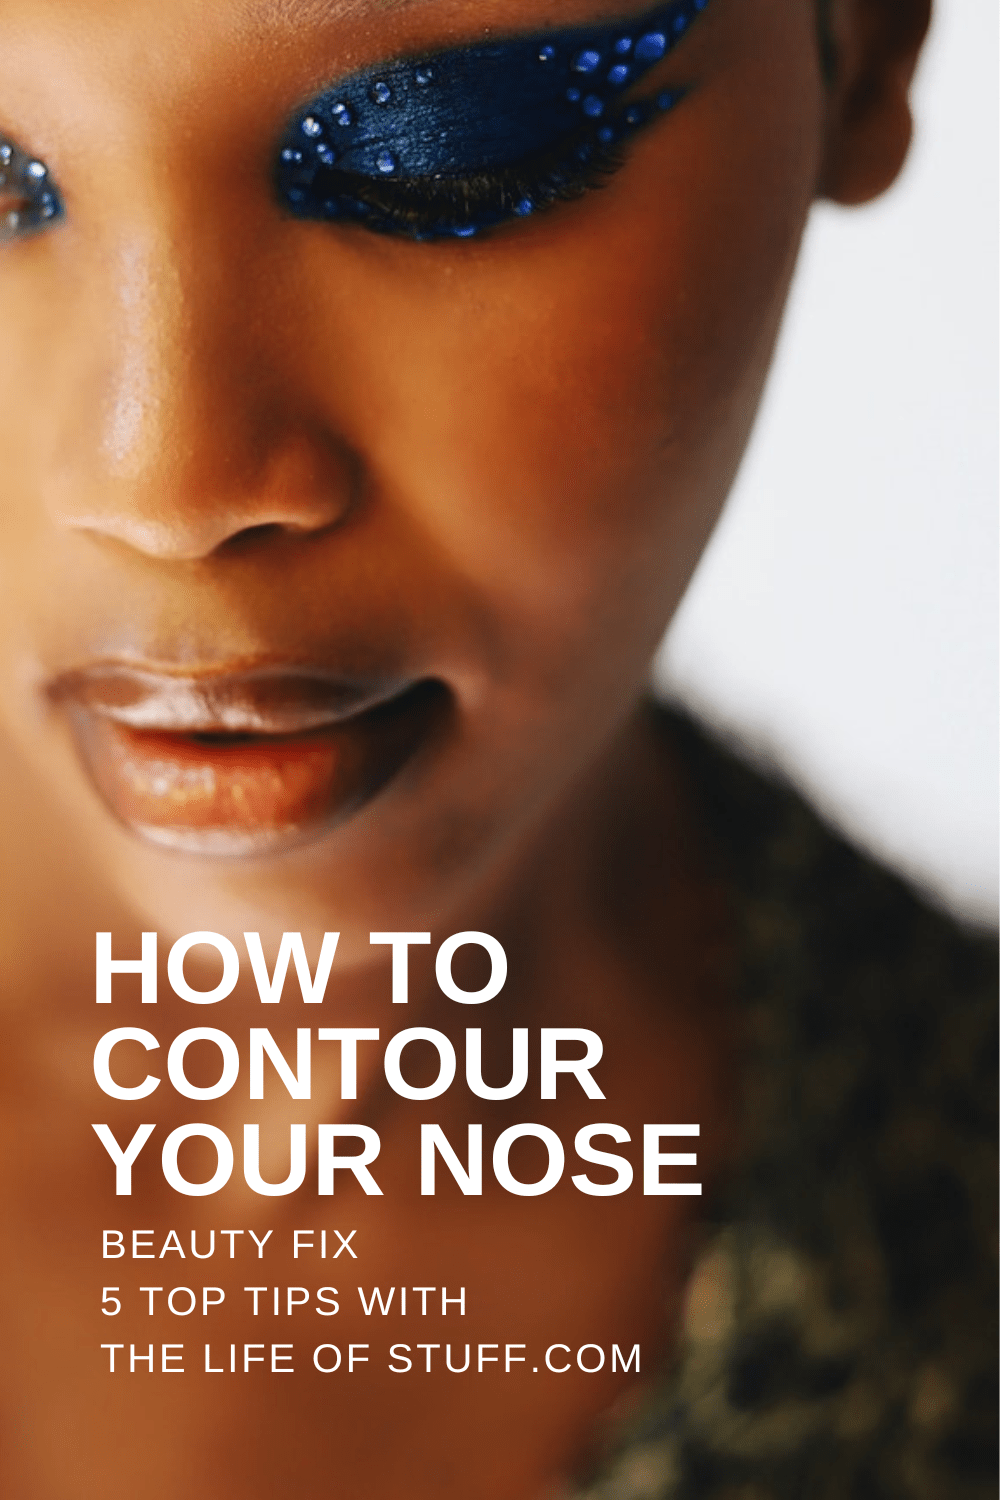 Beauty Fix How To Contour Your Nose 5 Top Tips The Life of Stuff